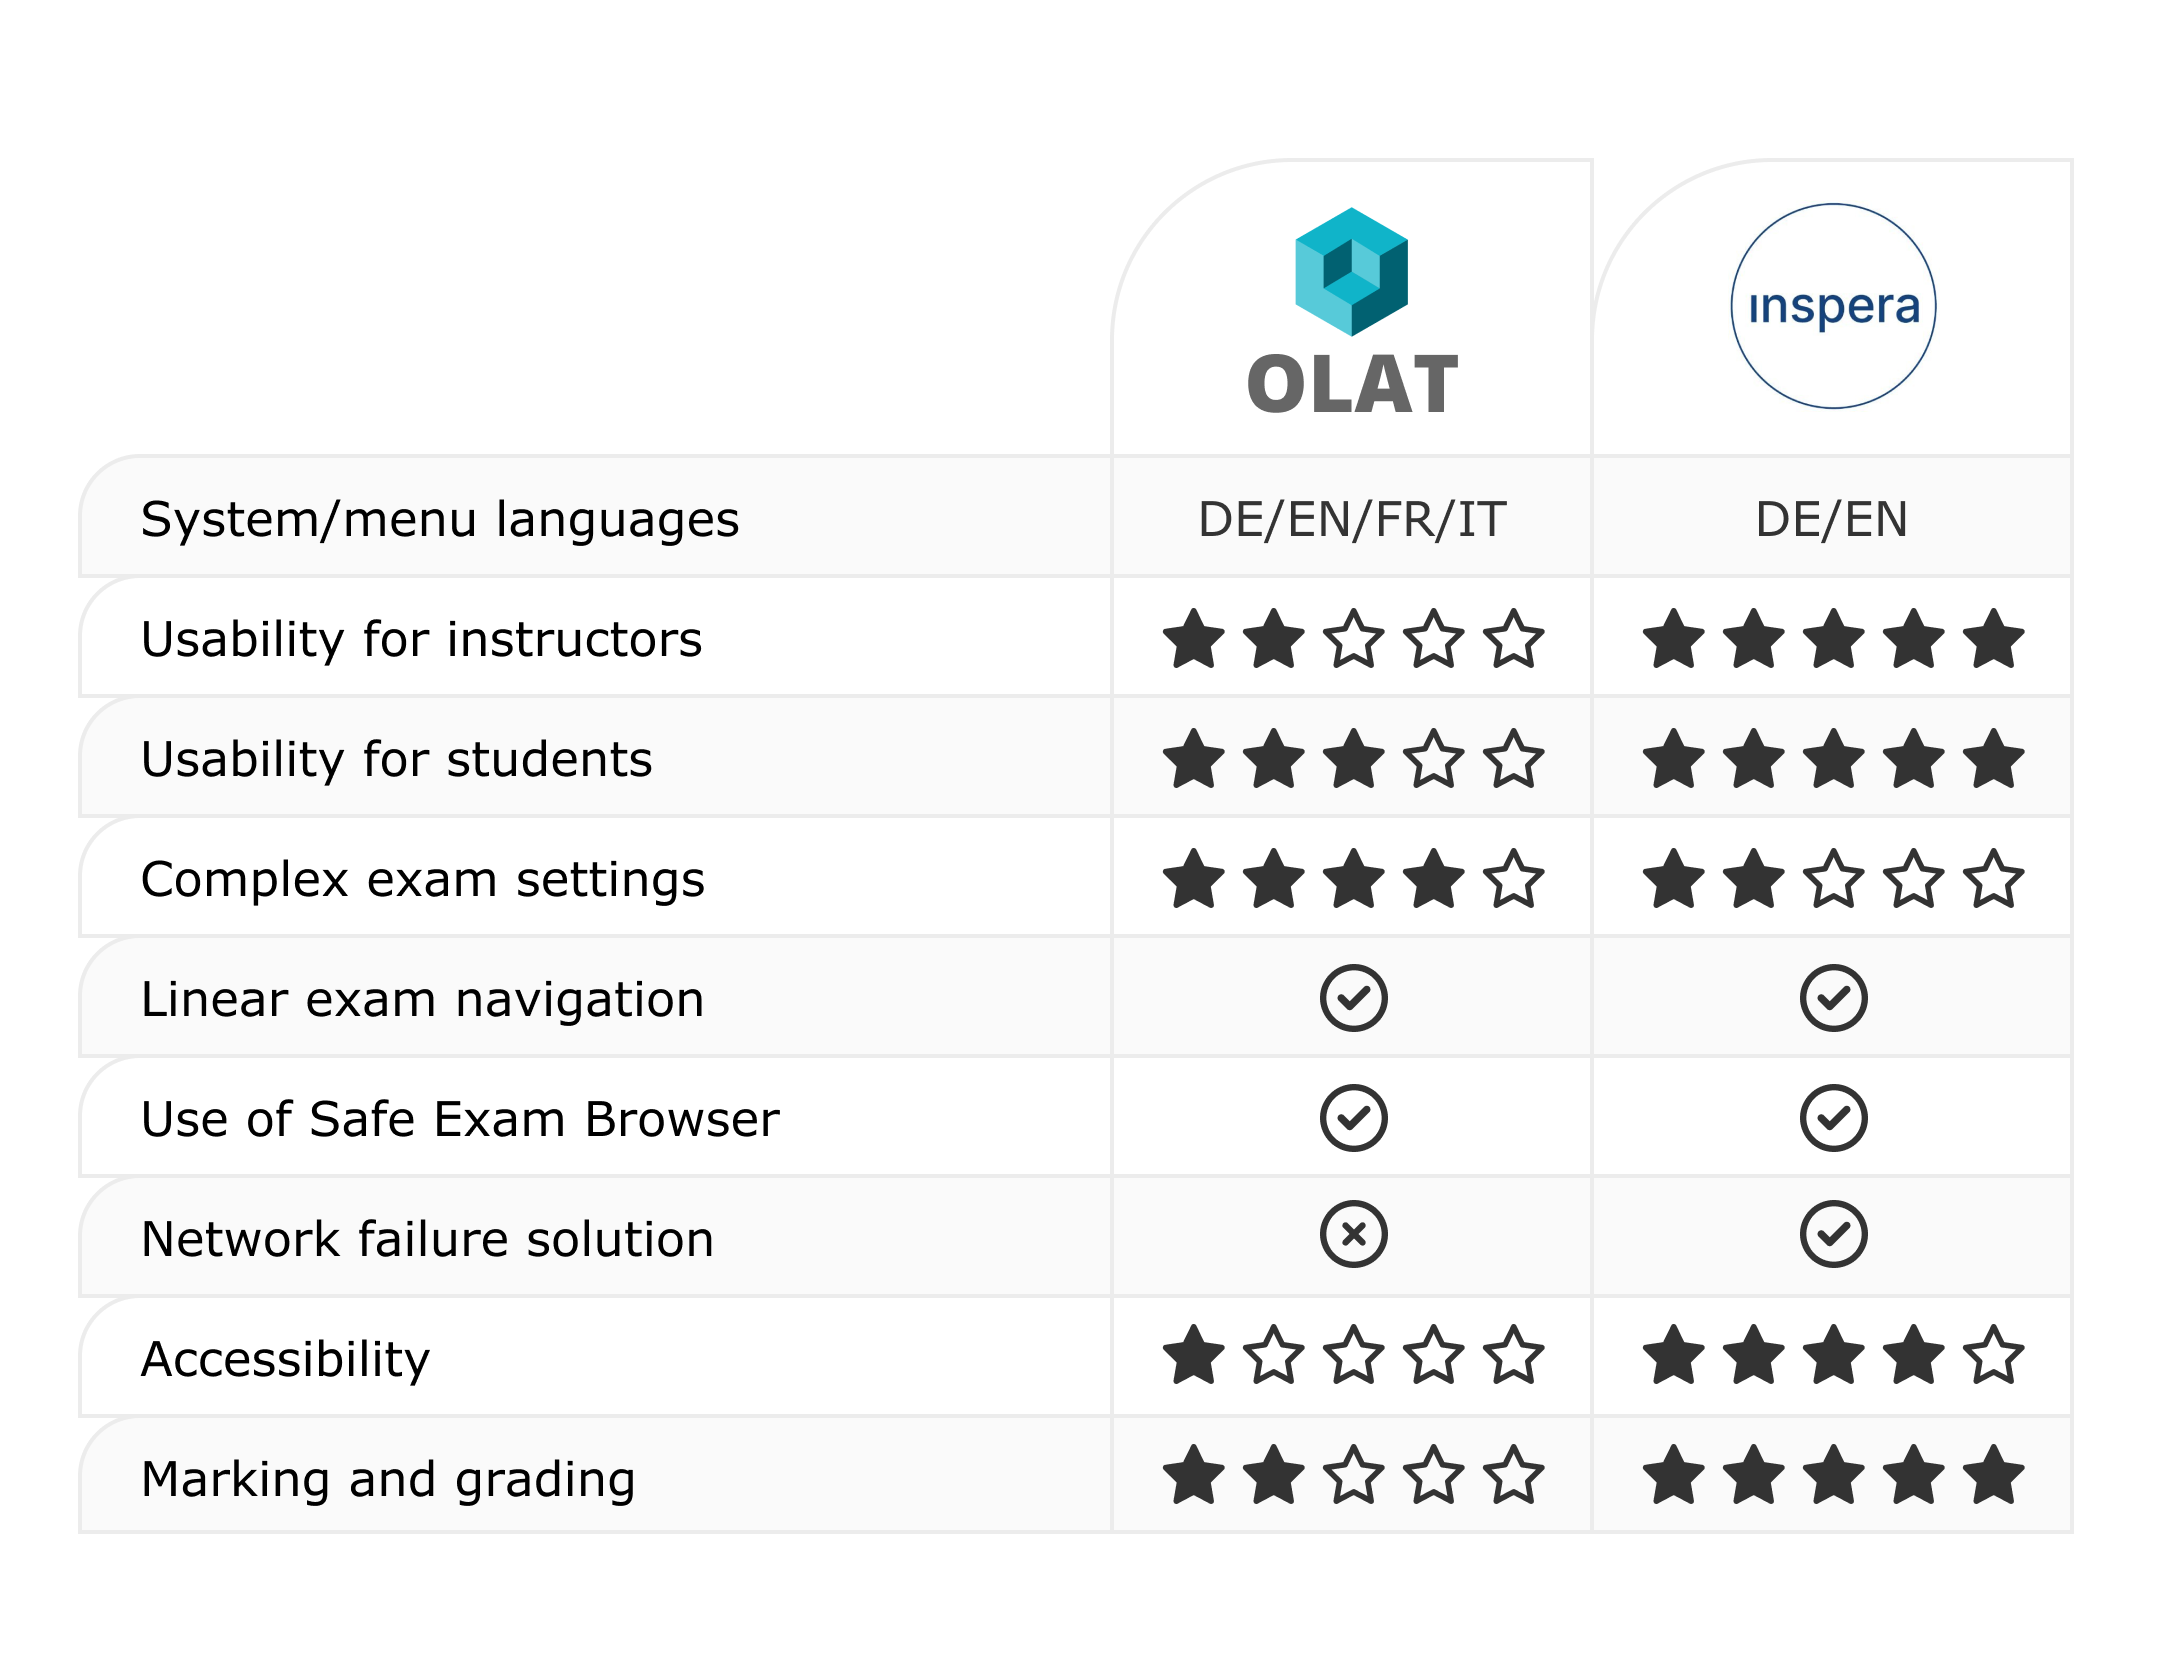 Decision support for online exams when choosing software: OLAT or Inspera?